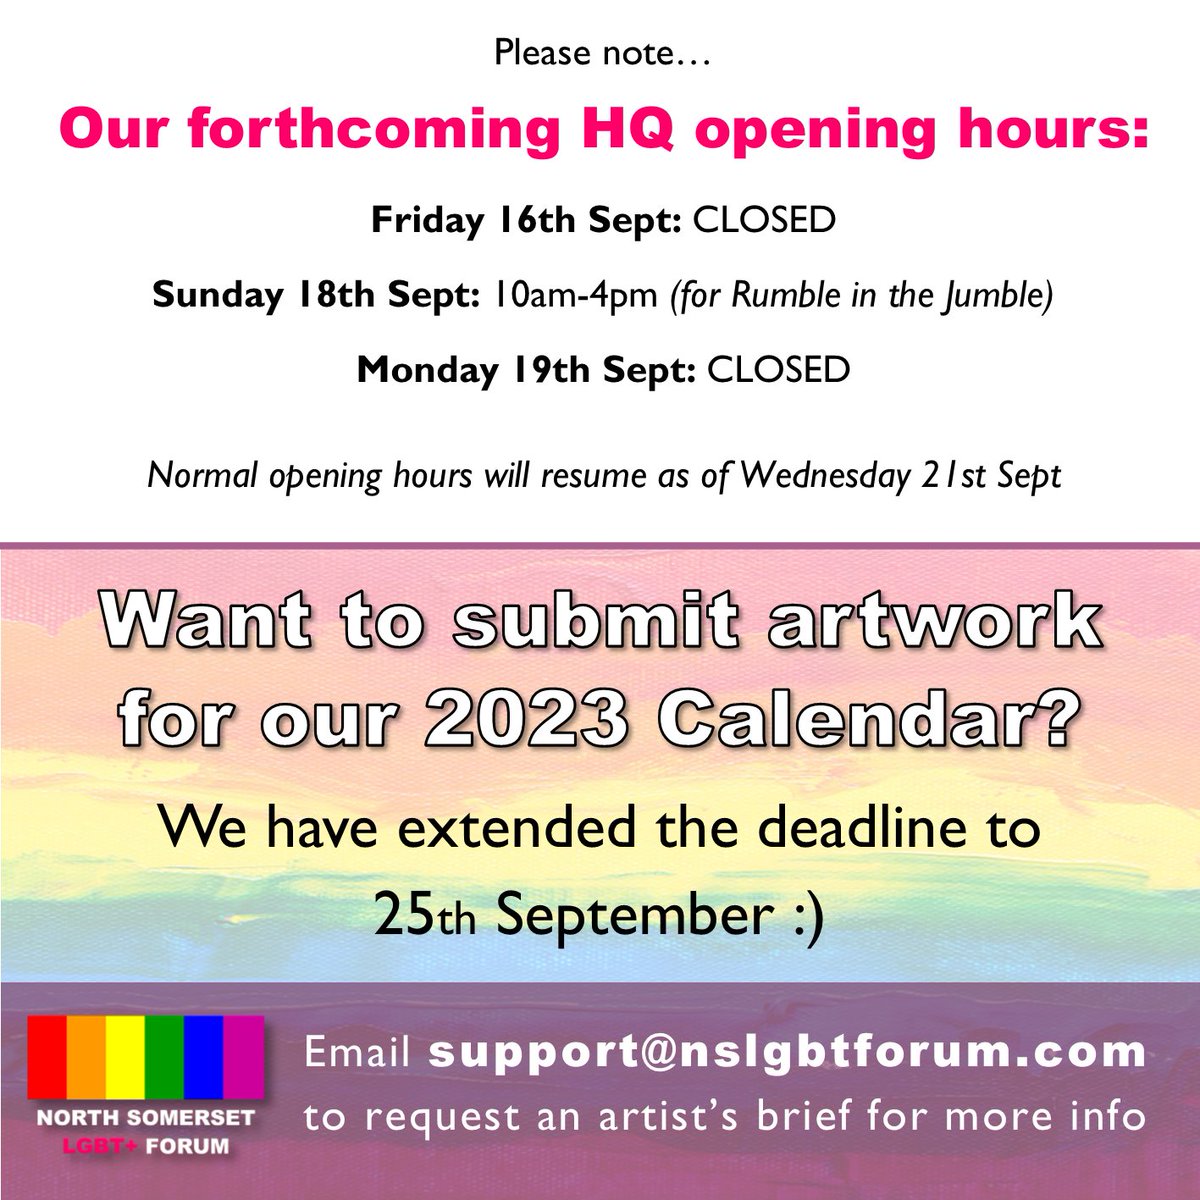 Please note we will be closed today and Bank Holiday Monday, but back in action as normal from Wednesday 21st Sept. We have also extended the deadline for submissions for our 2023 LGBT+ calendar, so if you have yet to complete your artwork, you still have time!